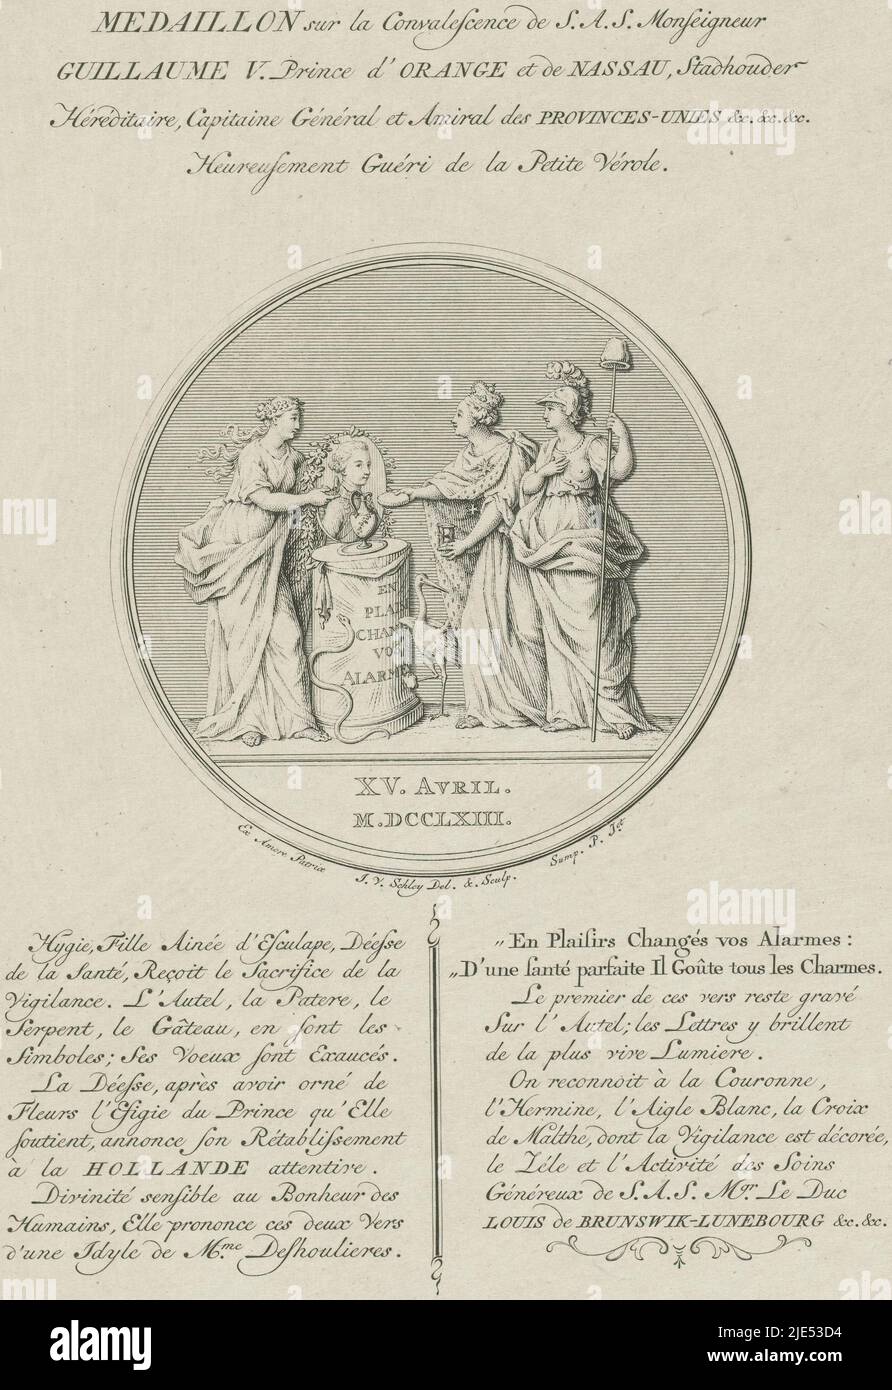 Allegoric medallion commemorating the recovery of Stadholder William V after a brief illness, April 15, 1763. Vigilance and the Dutch Virgin at an altar with a portrait of the prince begging Hygieia to cure the prince. Below the scene a caption in two columns in French, Medaillon on the recovery of William V after illness, 1763 Medaillon sur la Convalescence de S.A.S. Monsignor Guillaume V. Prince d'Orange (...) Heureusement Guéri de la Petite Vérole, print maker: Jacob van der Schley, (mentioned on object), intermediary draughtsman: Jacob van der Schley, (mentioned on object), Northern Stock Photo